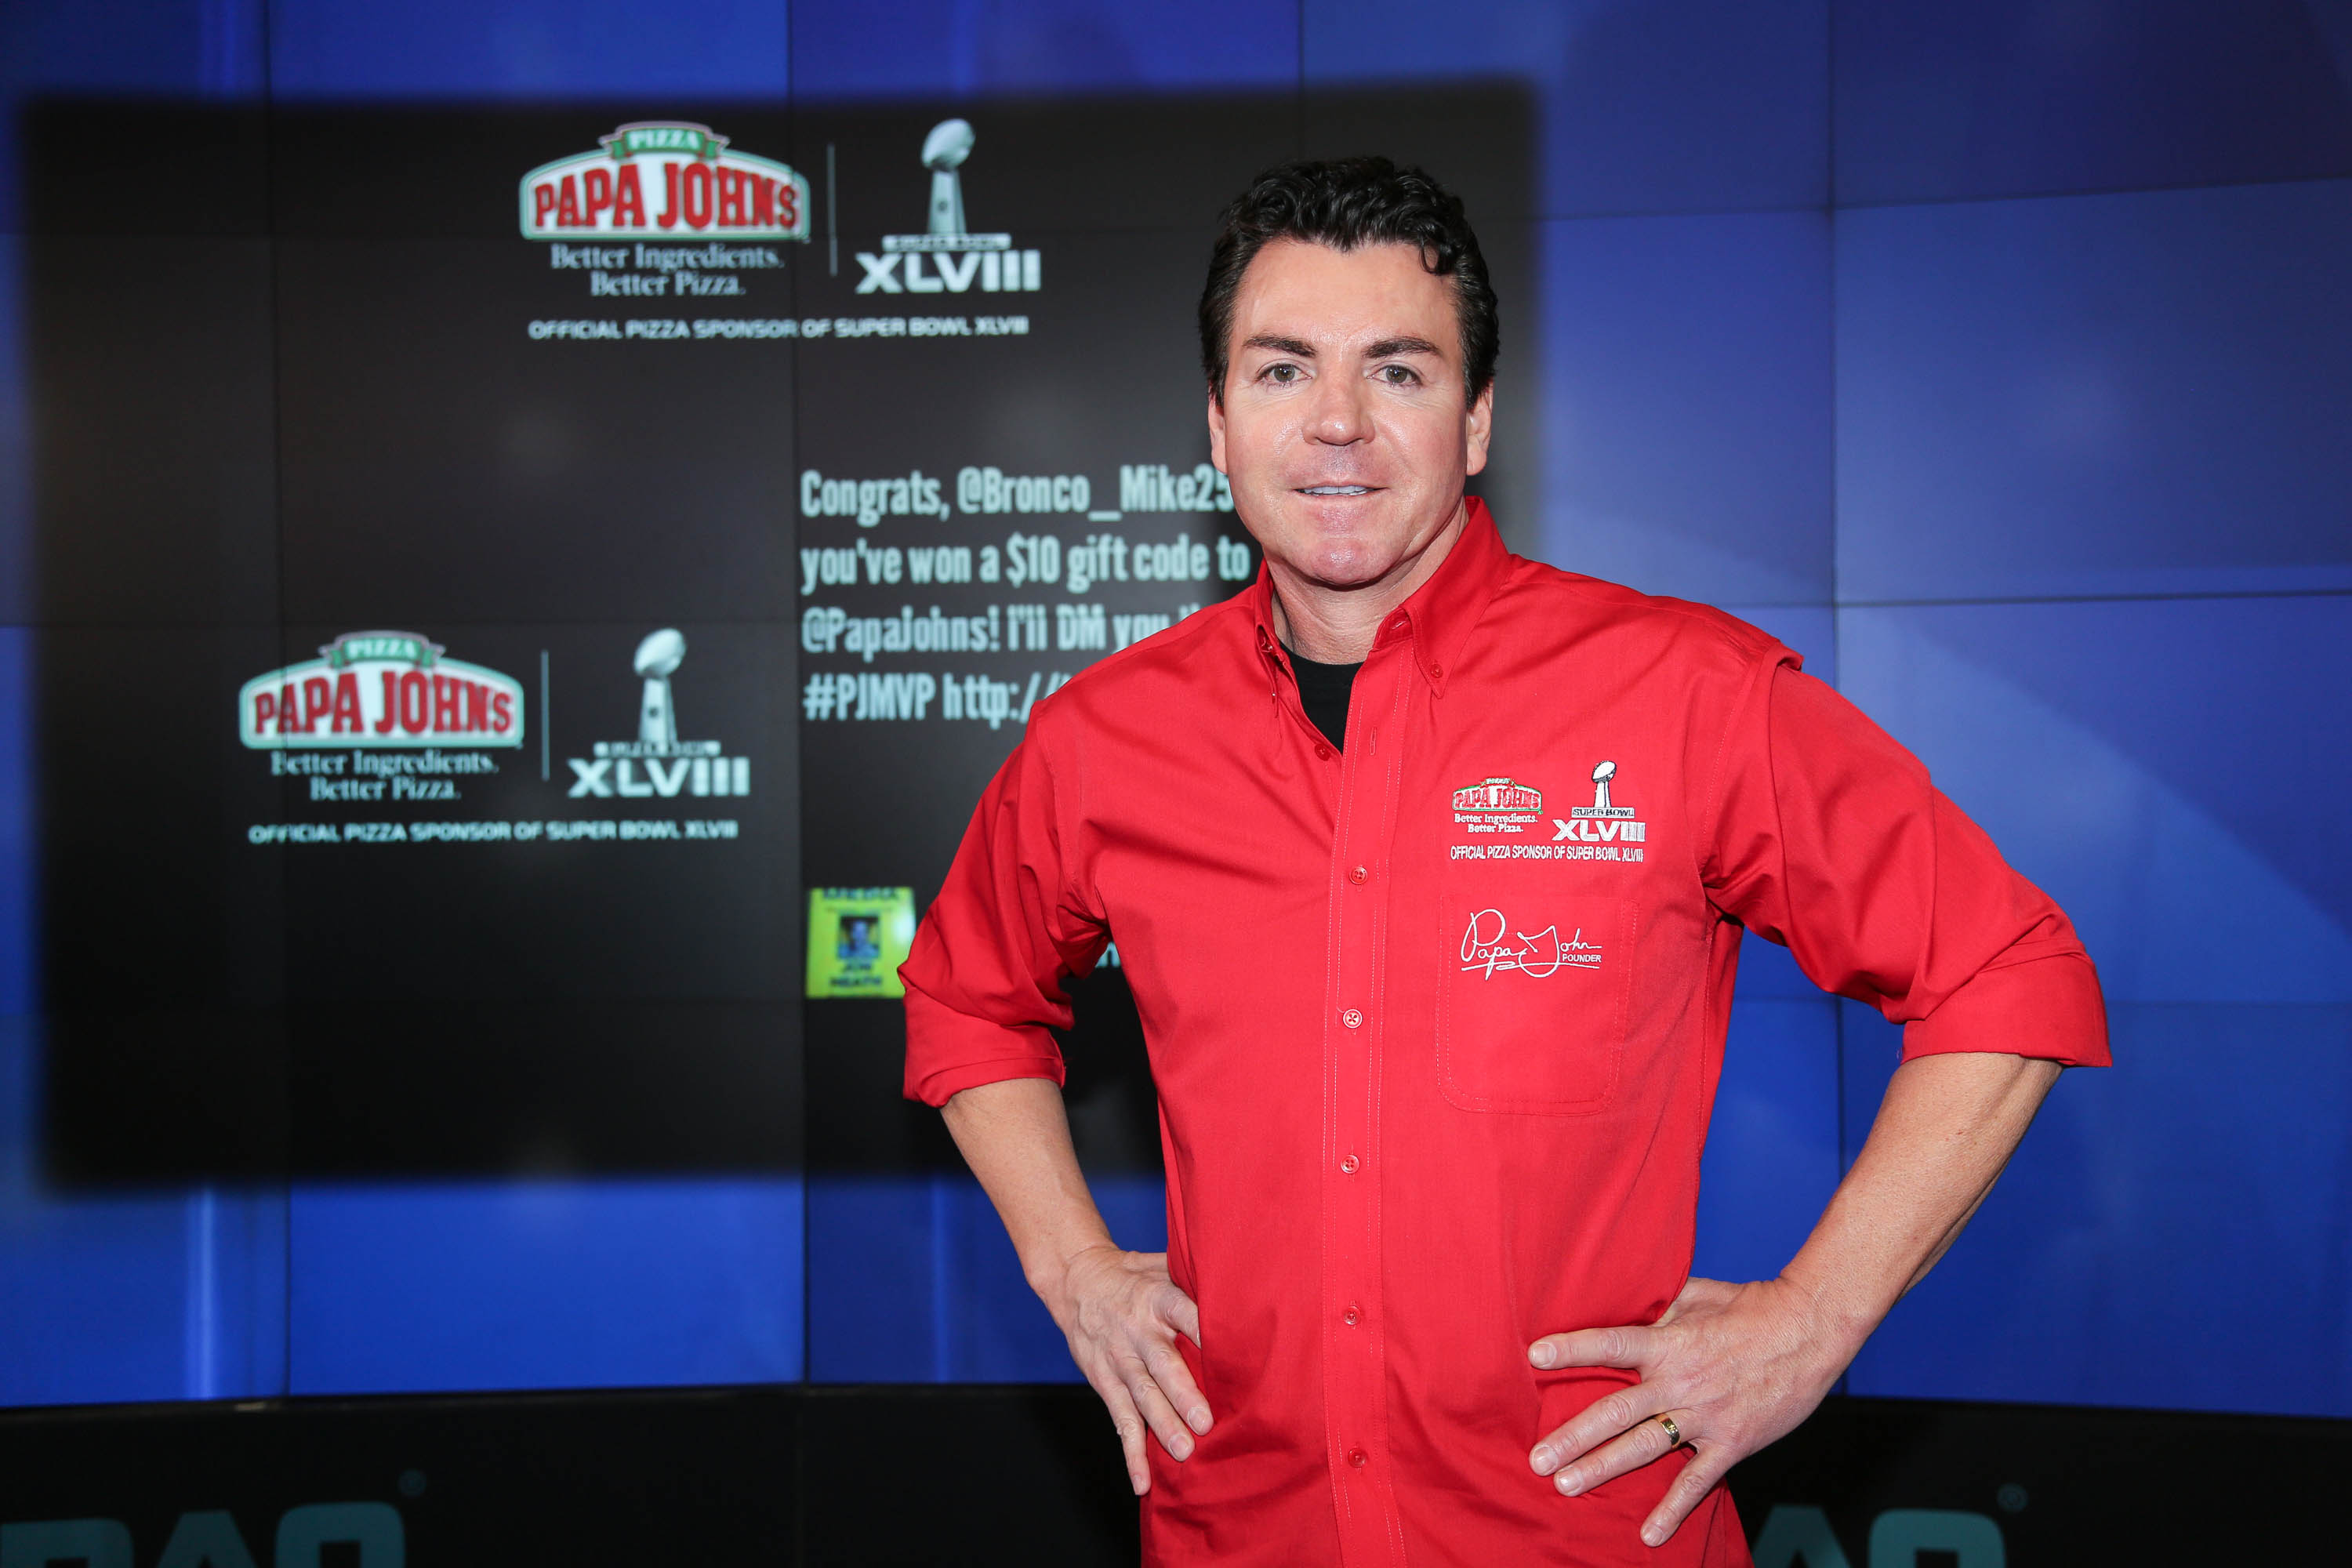 Papa John's CEO Blames Poor Pizza Sales on the NFL Protests